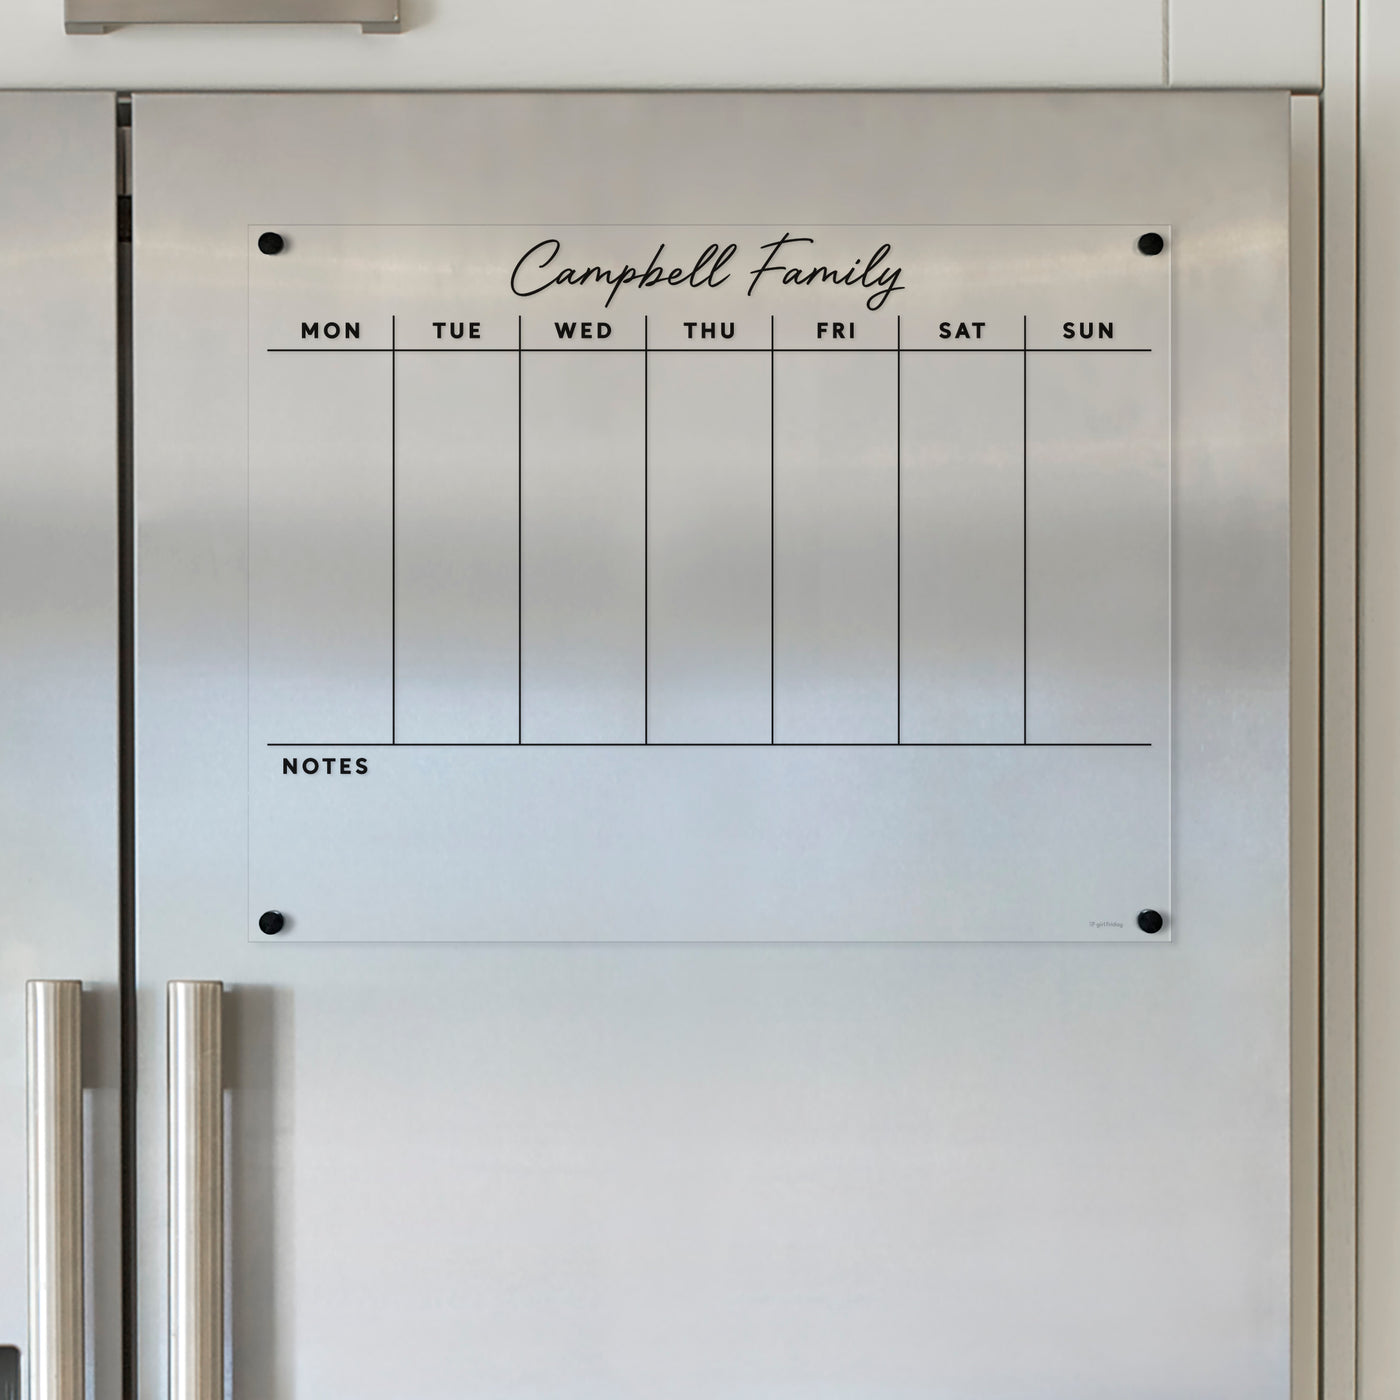 Clear Acrylic FRIDGE calendar WEEKLY and NOTES customized with family name